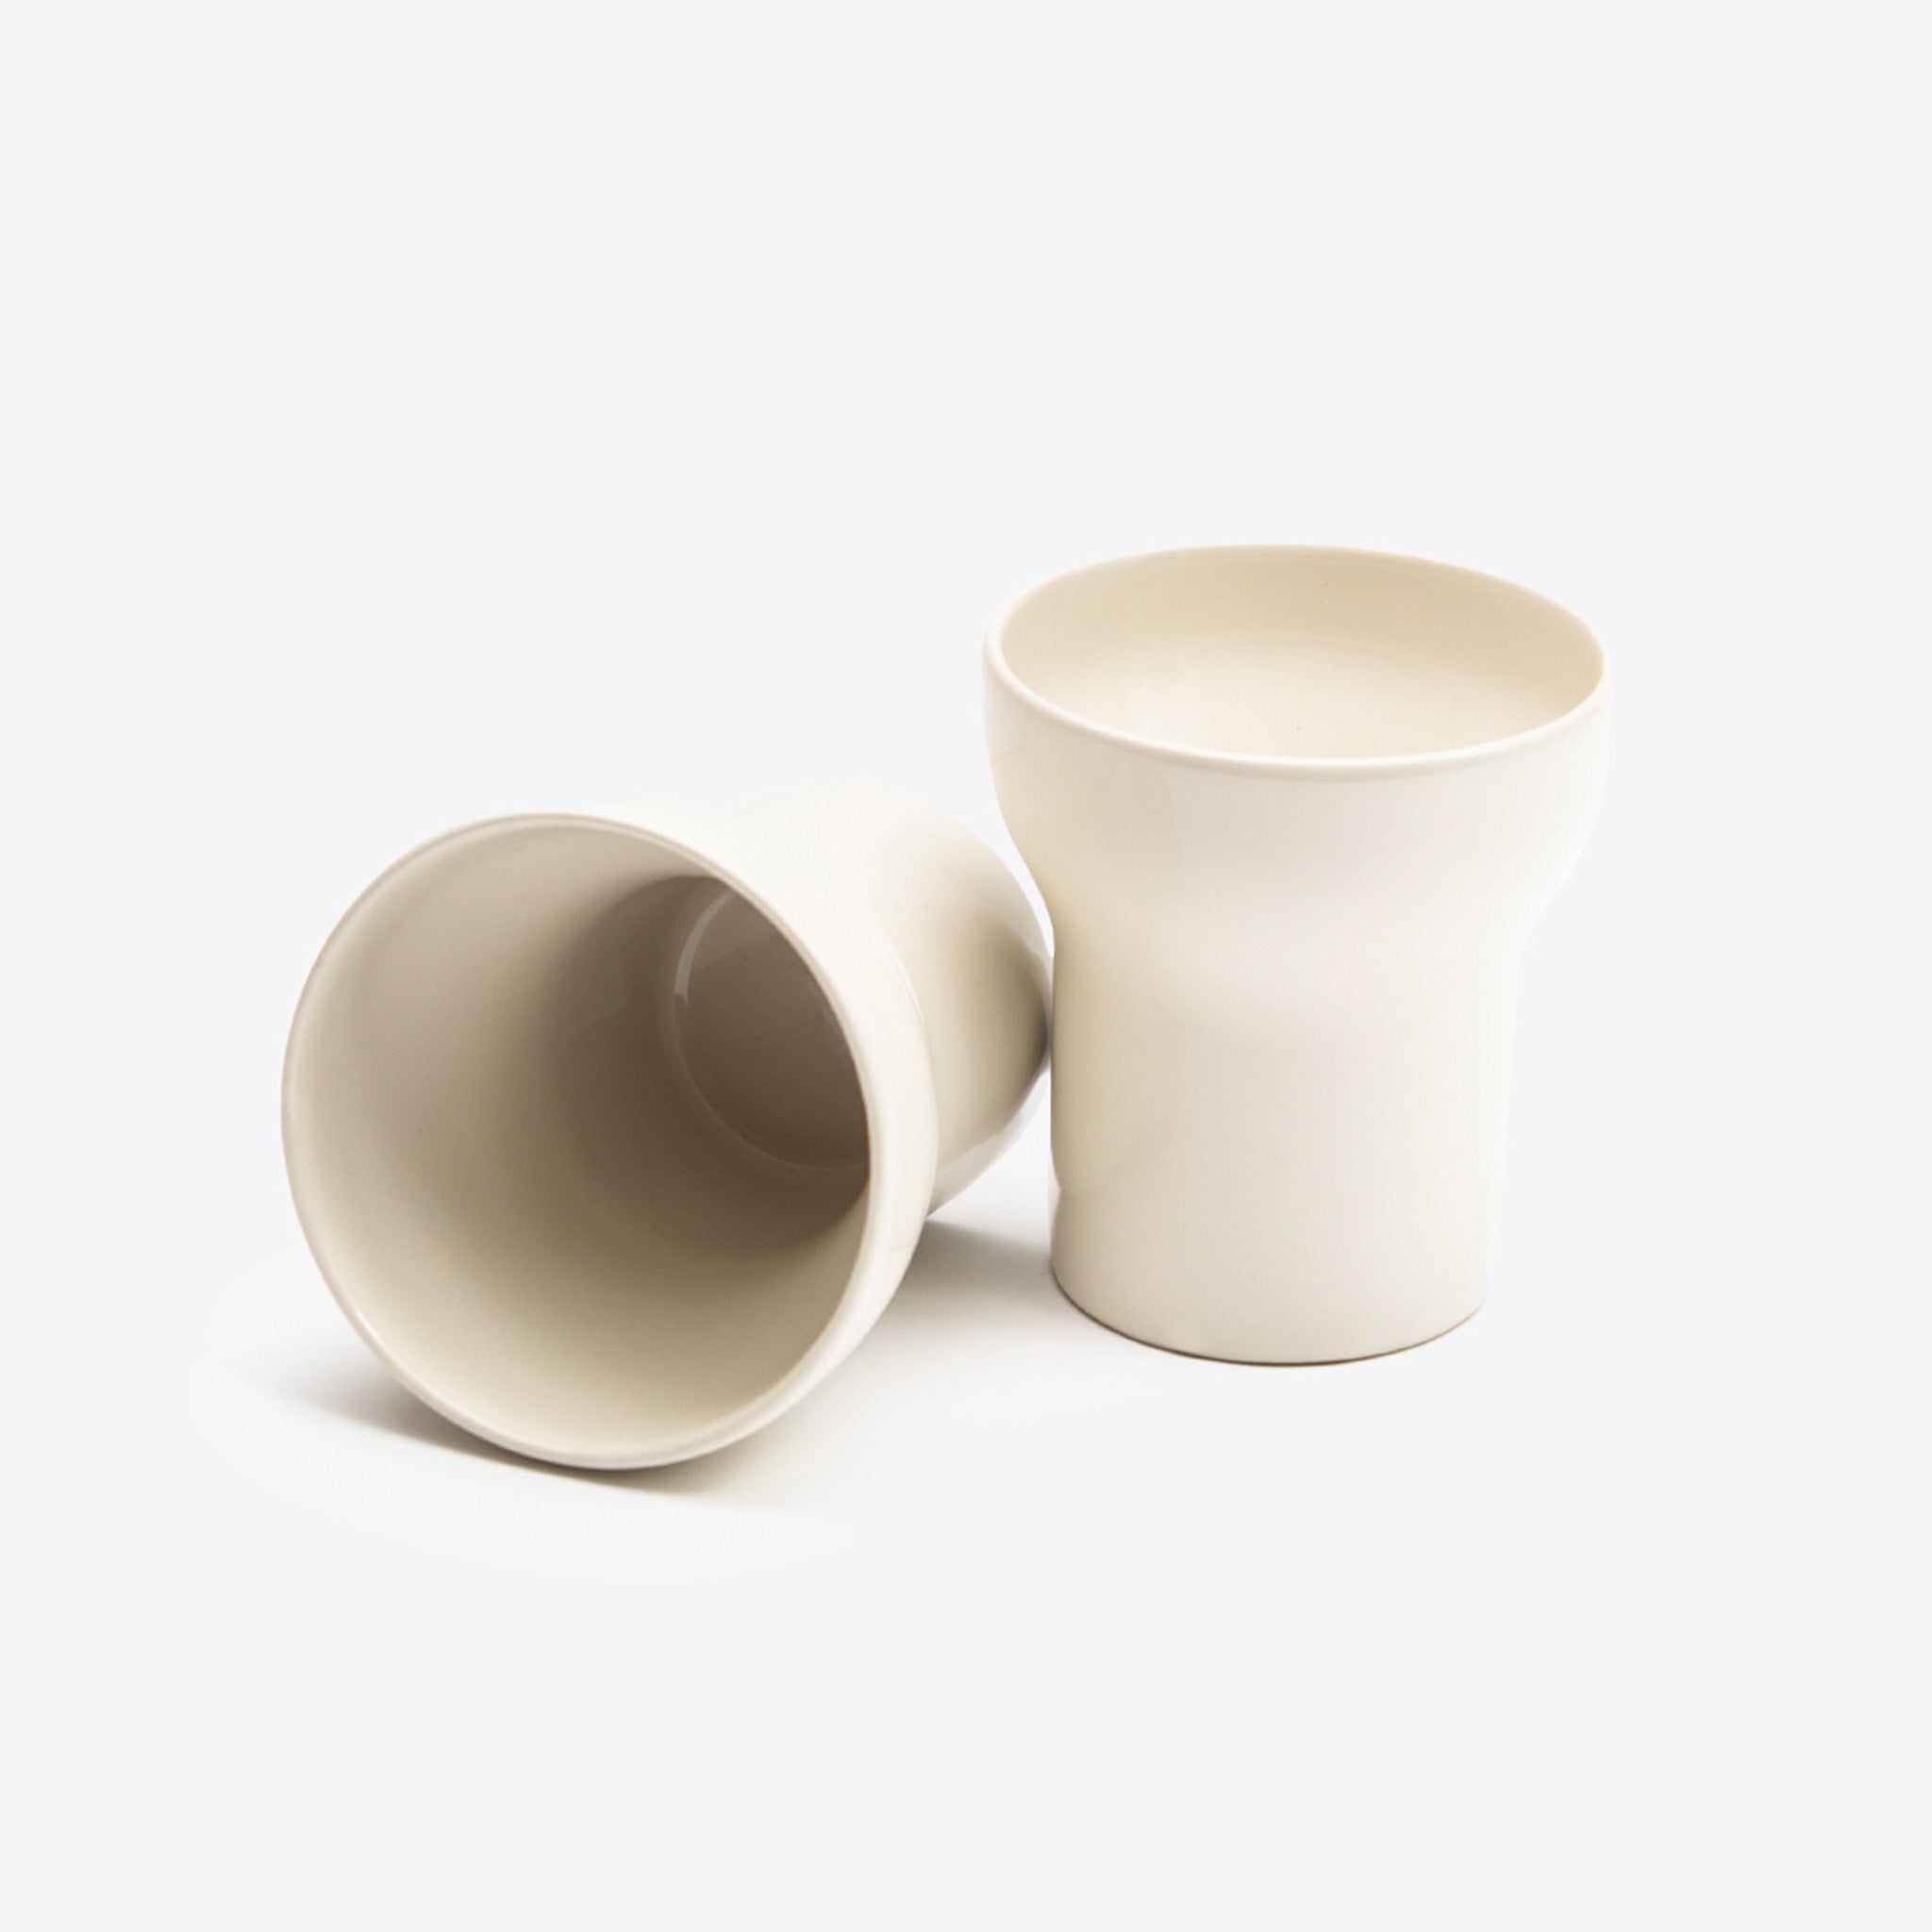 Goblet by John Pawson for When Objects Work